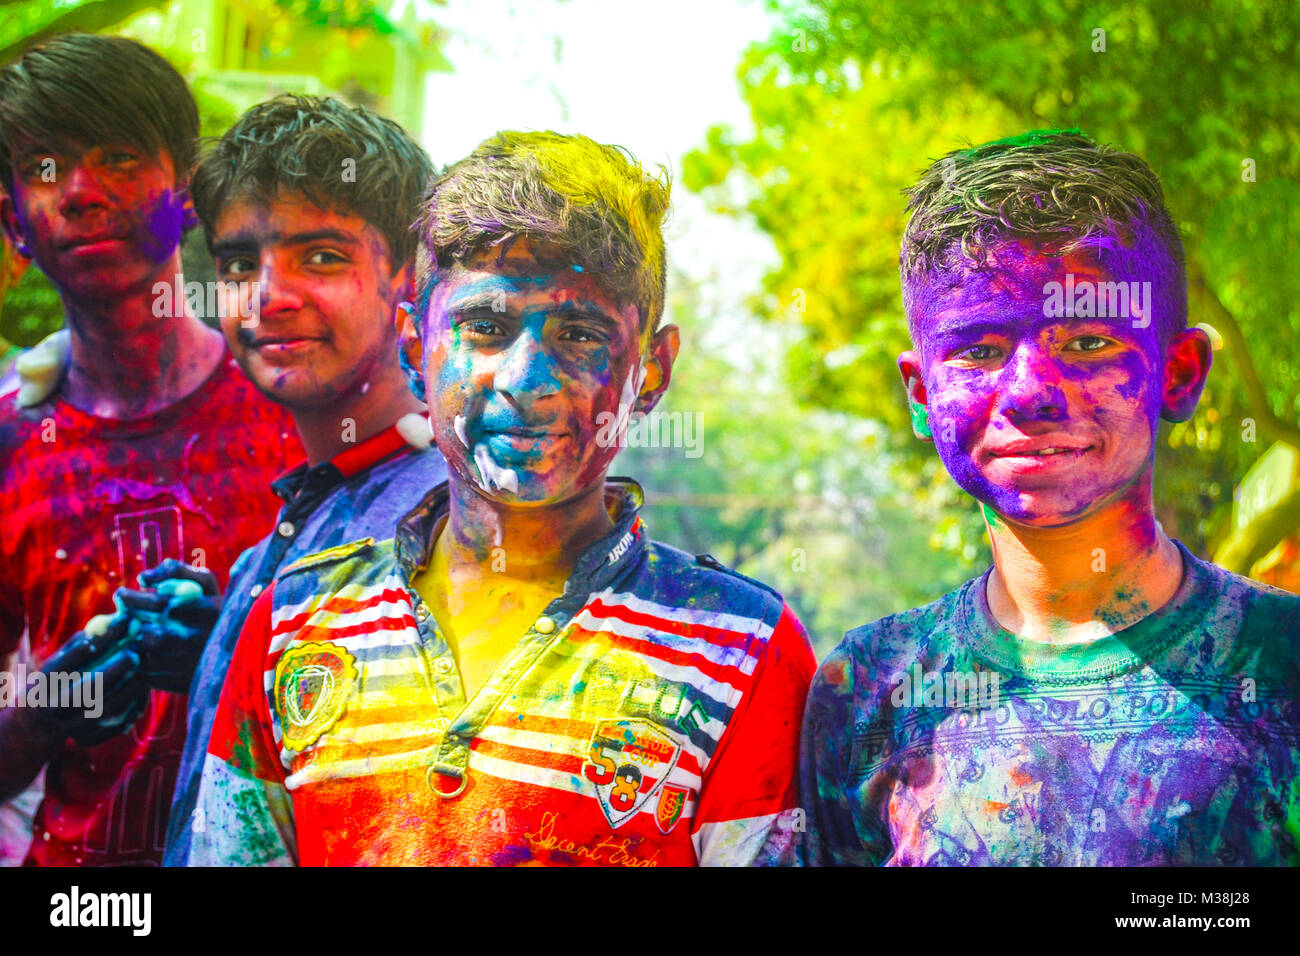 A group of teenage boys covered in powder paint during the celebration of the Hindu spring festival Holi in New Delhi, India. Stock Photo